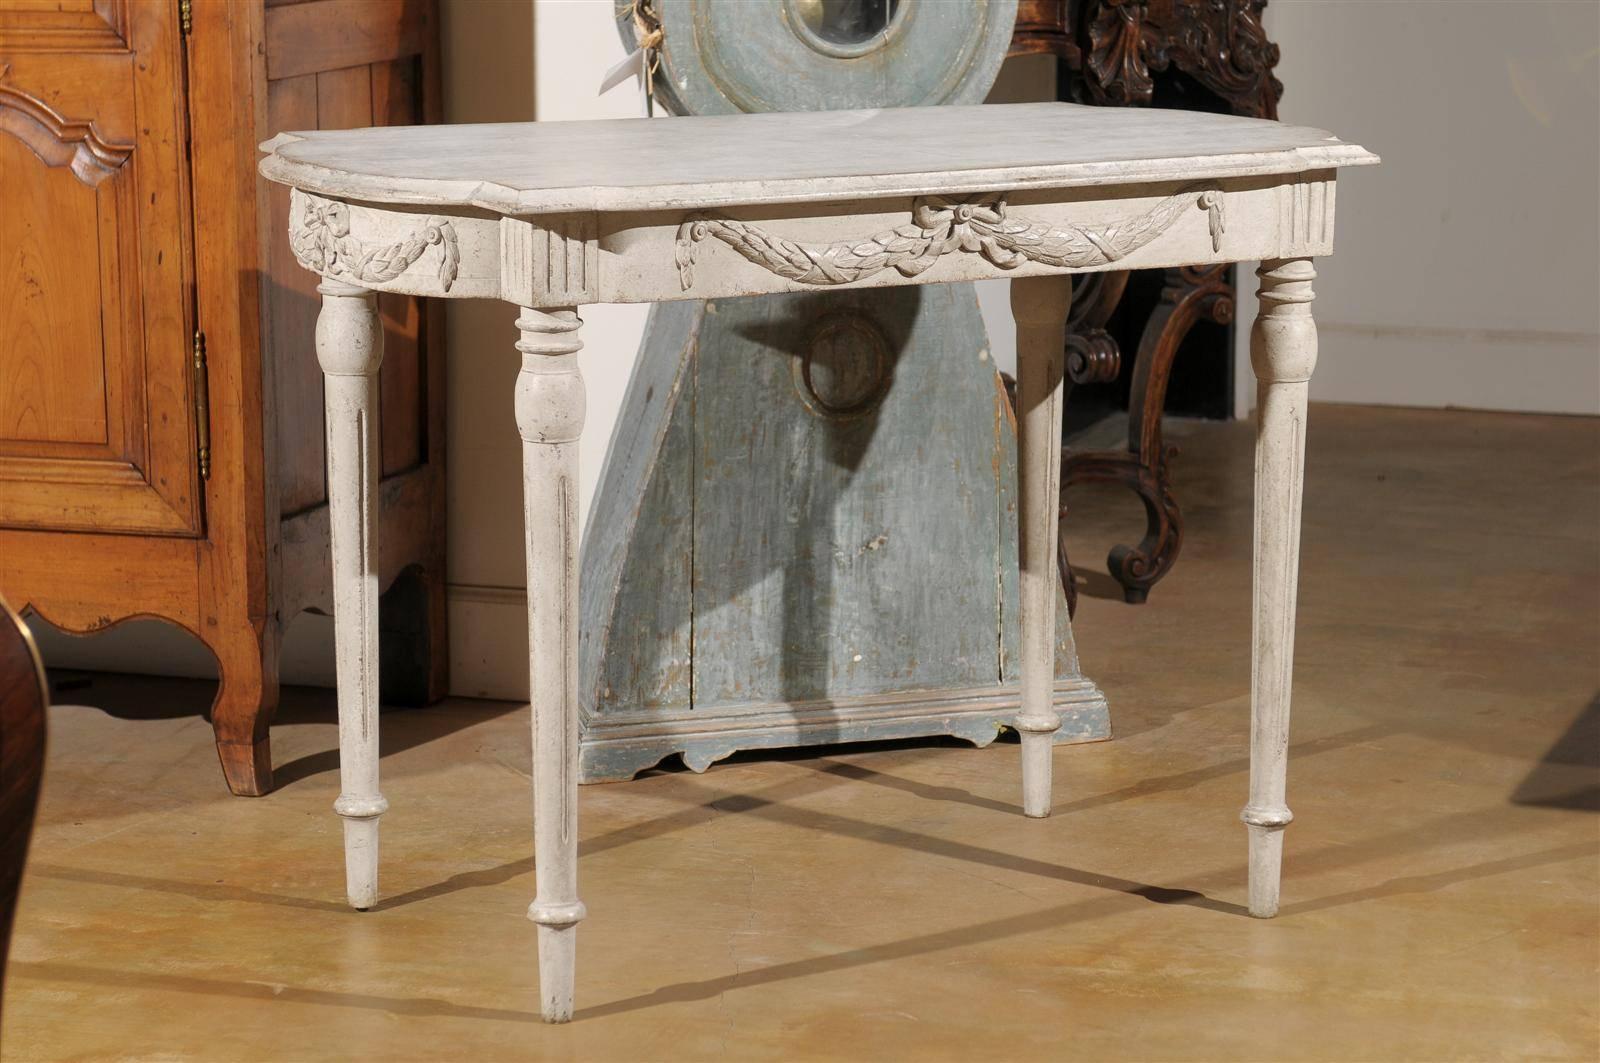 This Swedish painted wood Gustavian Style tea table from the late 19th century features a contoured and beveled top over an exquisitely carved apron. Each side is adorned with a delicate swag and ribbon. The fluted knees are raised on four elegant